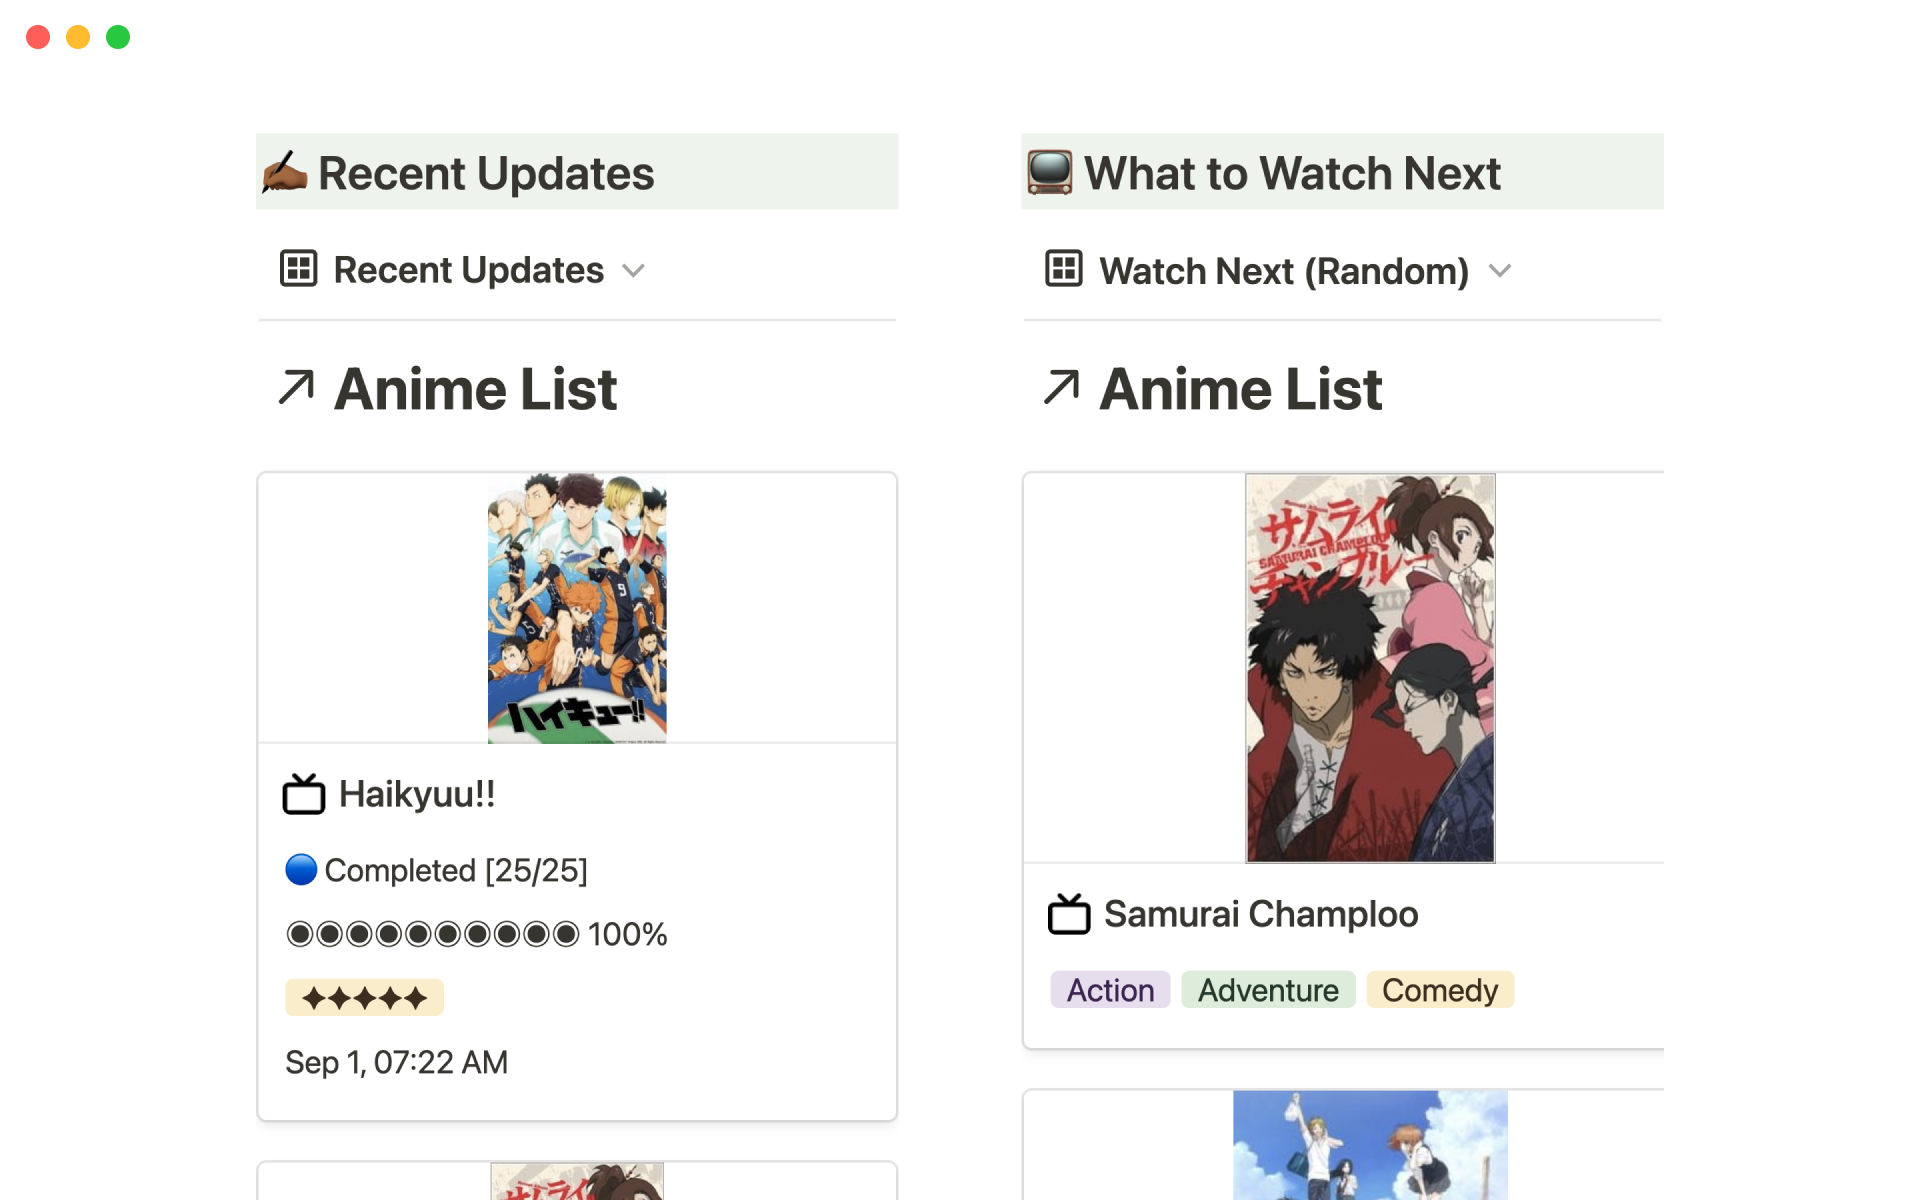 Keep track of the anime you watch by categorizing them and documenting your favorite characters.